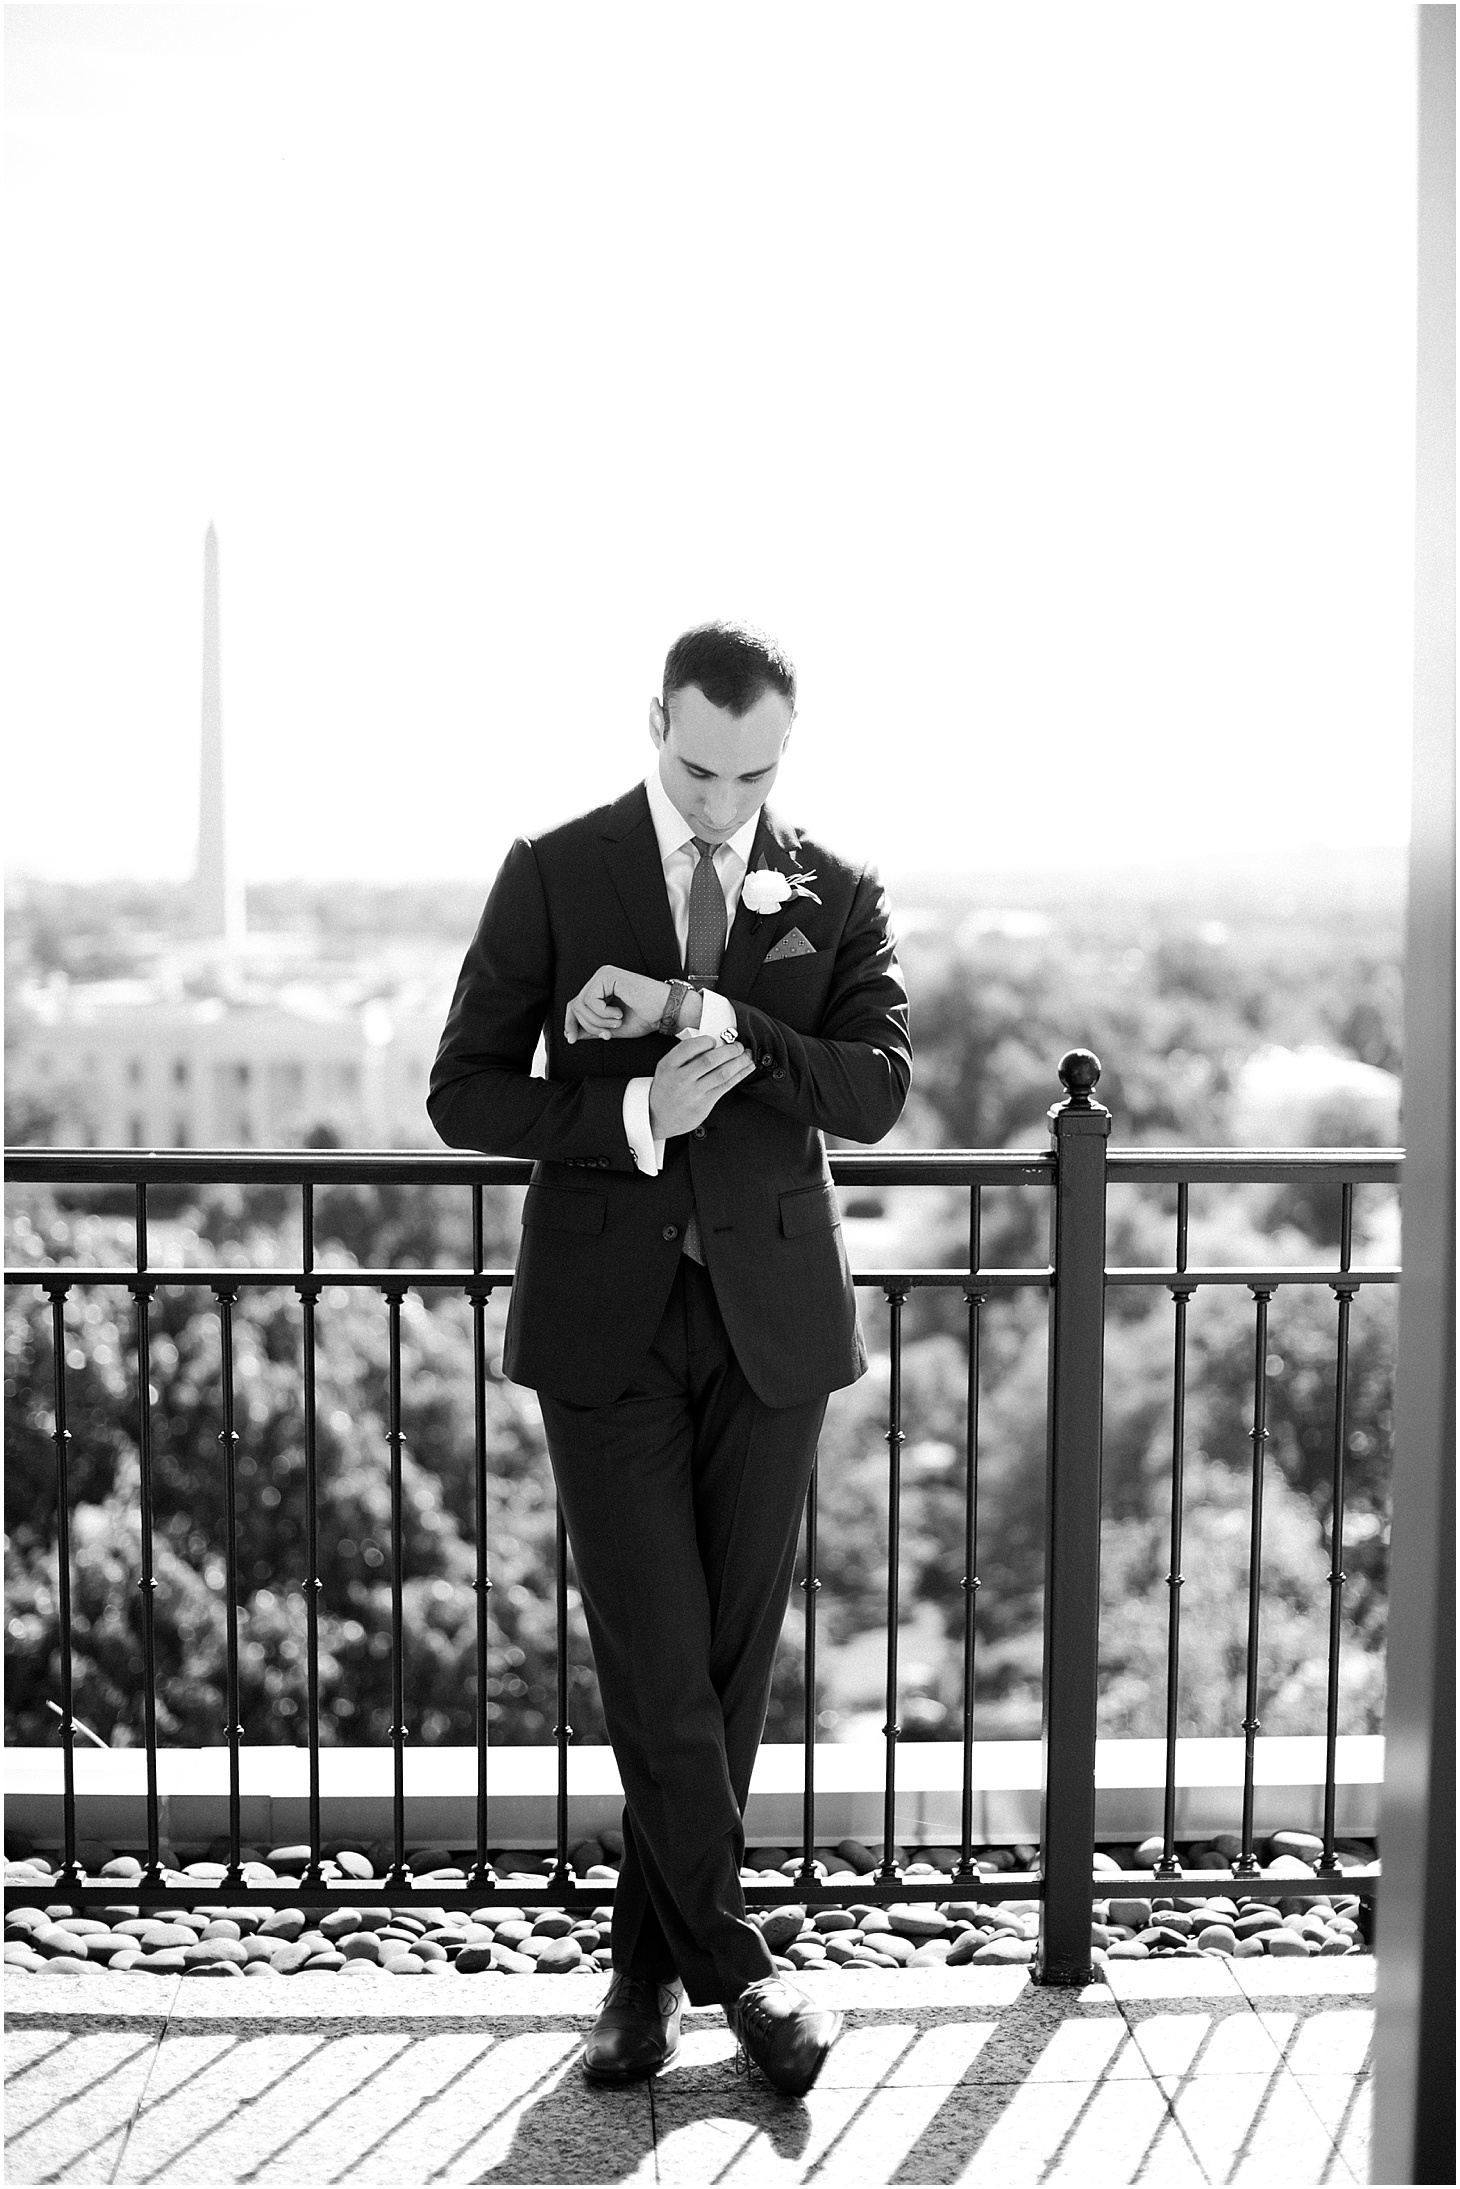 Groom at The Top of the Hay, Industrial-Chic Wedding at Long View Gallery in DC, Sarah Bradshaw Photography, DC Wedding Photographer